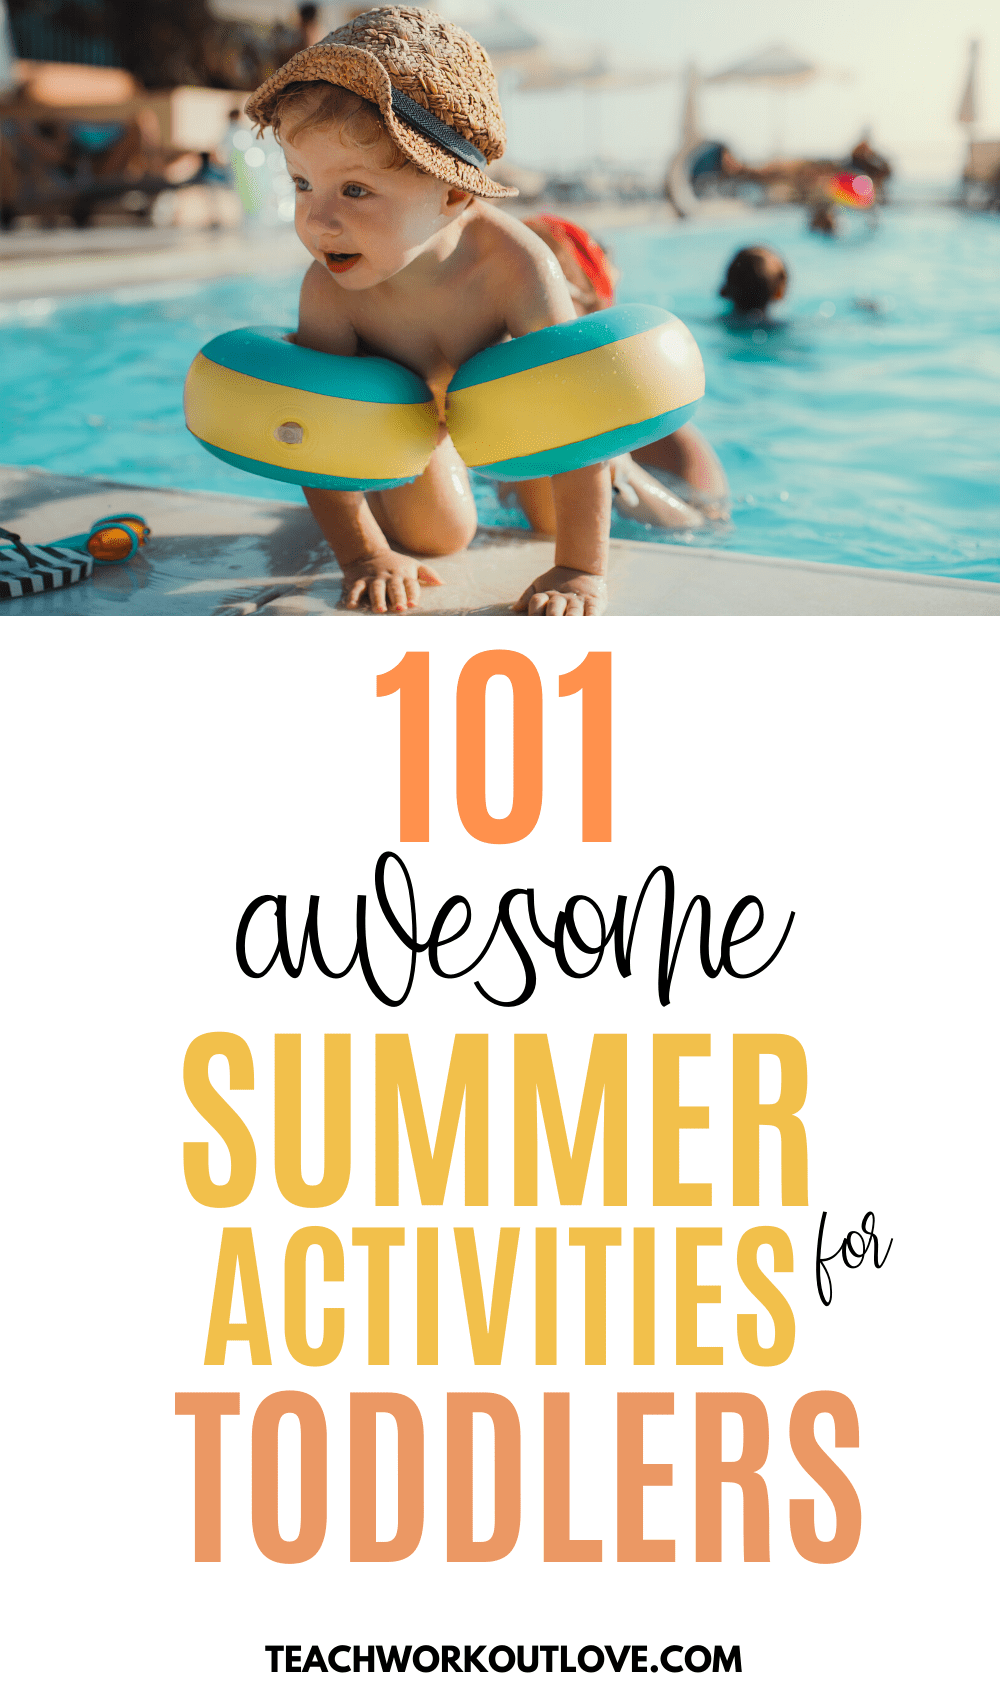 This list of 101 summer activities for toddlers will inspire you to share more moments with your little one this popsicle season...